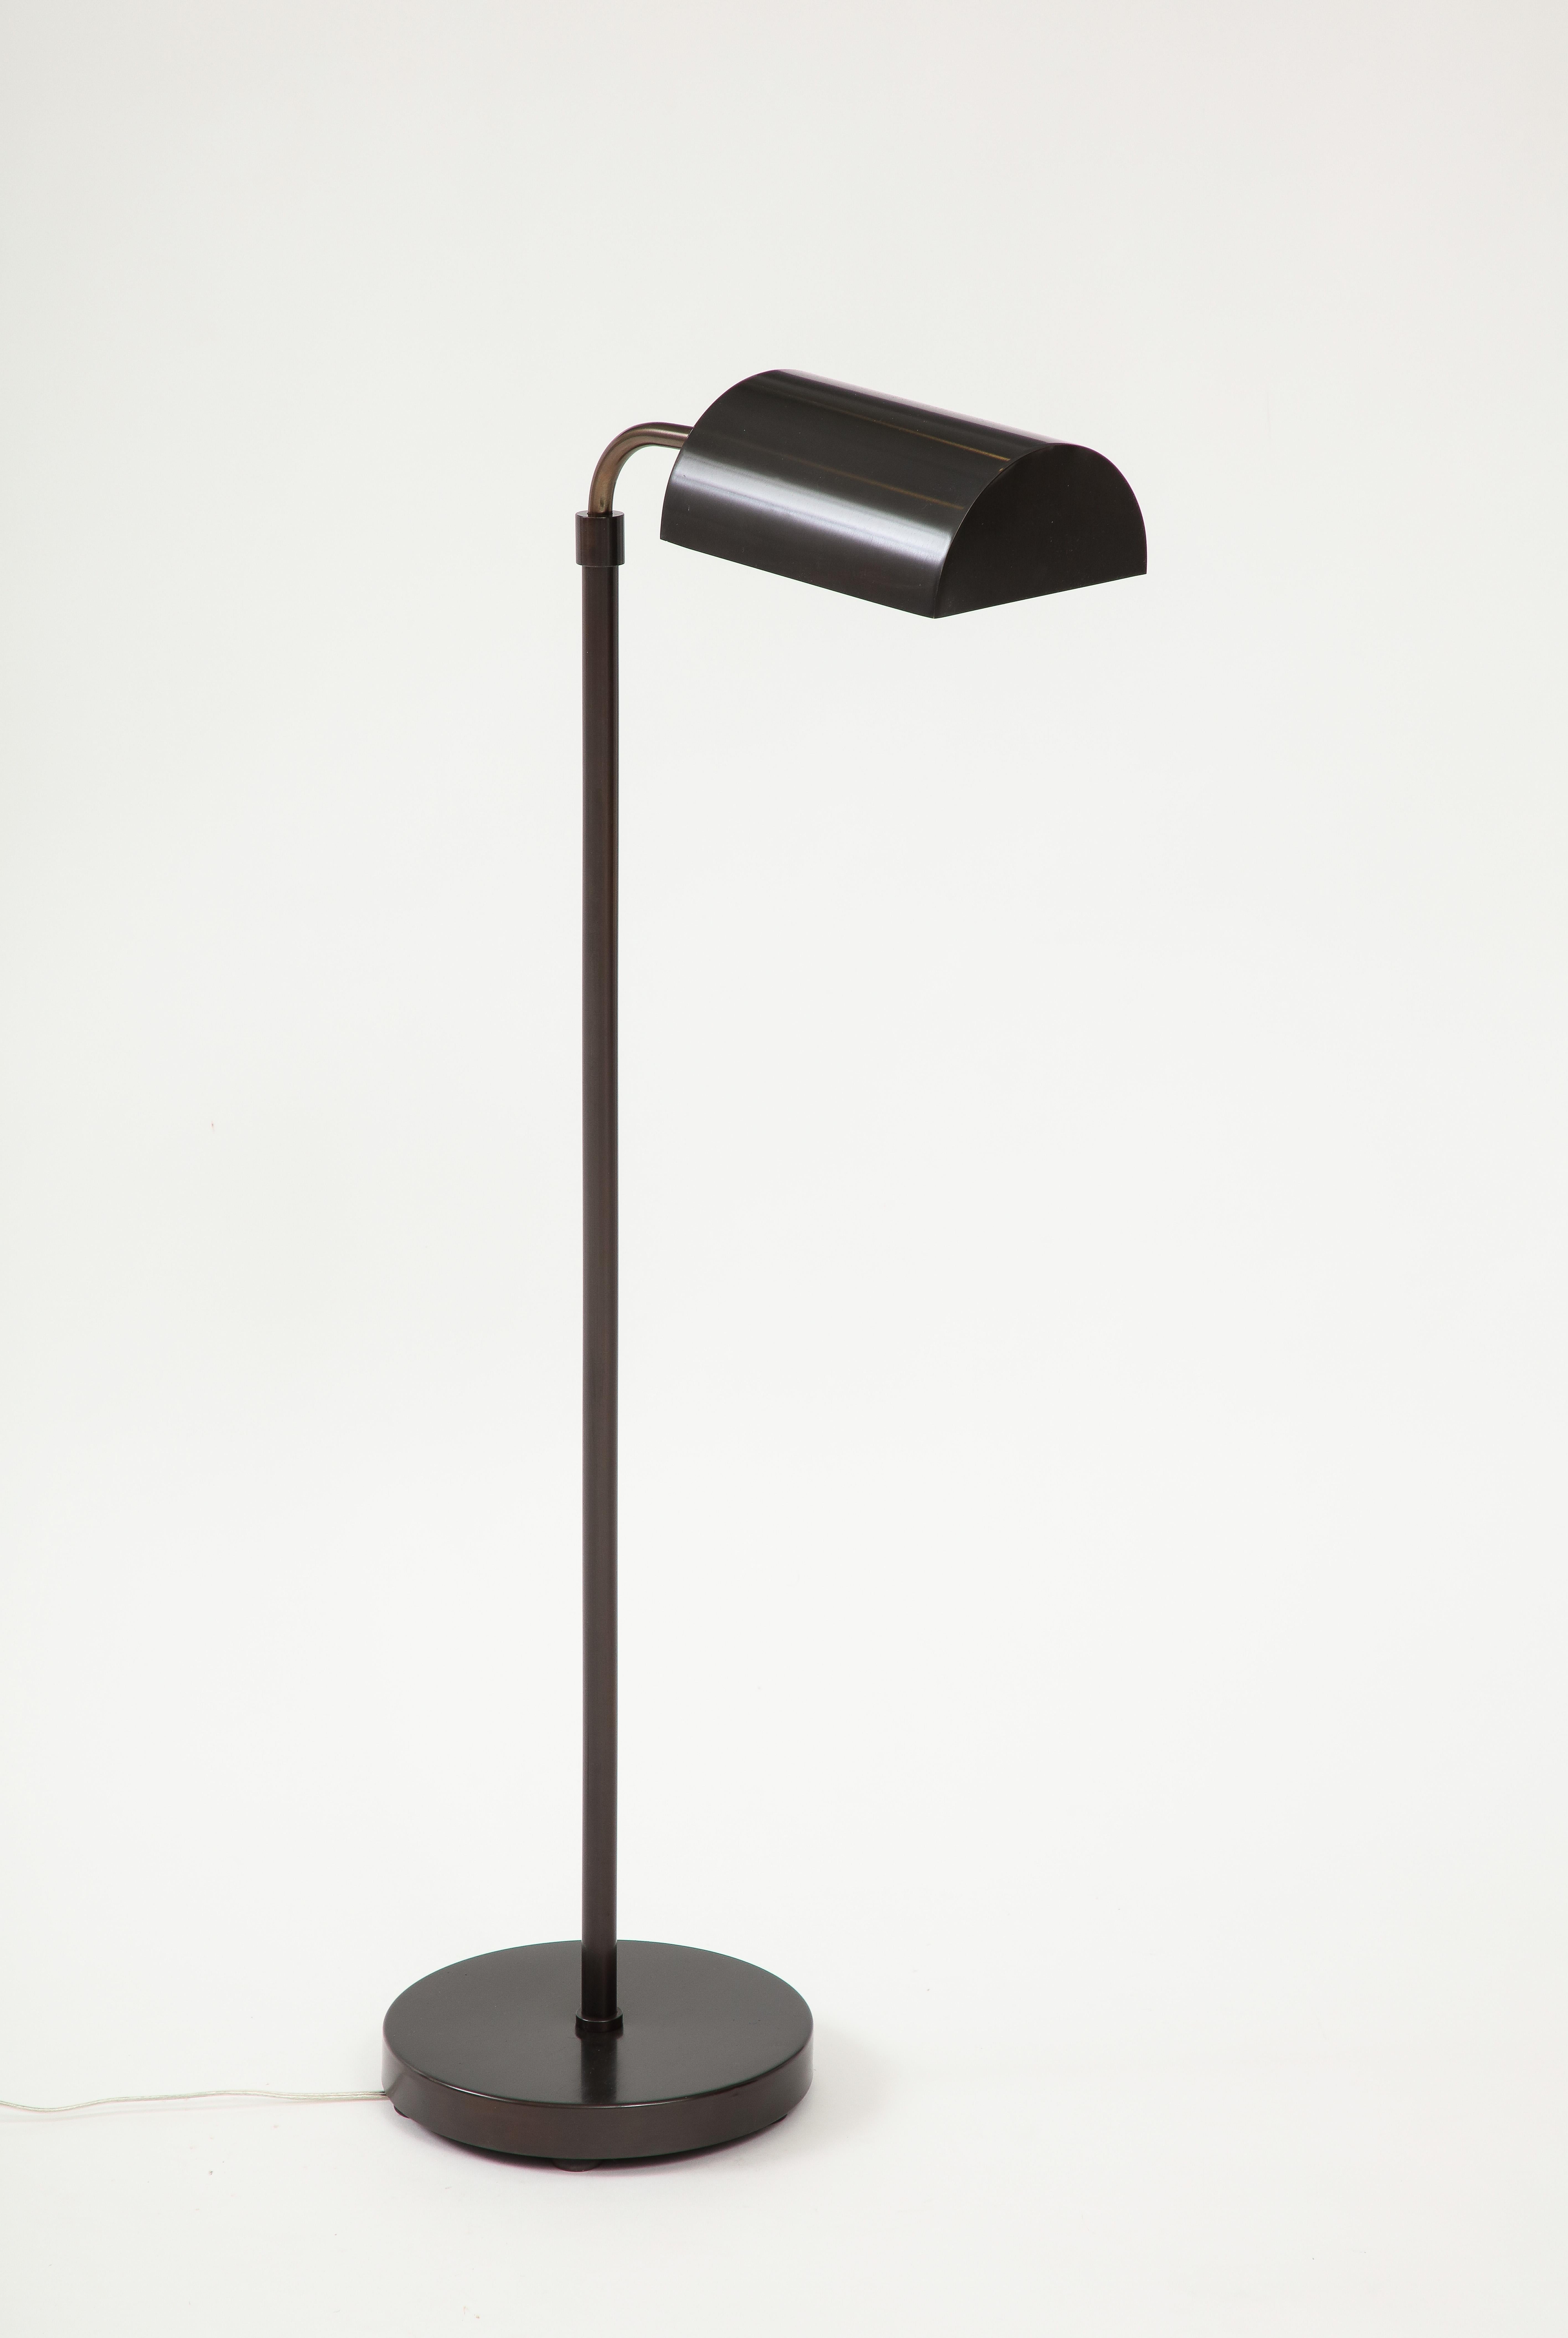 Modernist adjustable height and swiveling head bronze floorlamp by Koch & Lowy, c 70s. Rewired for use in the USA.